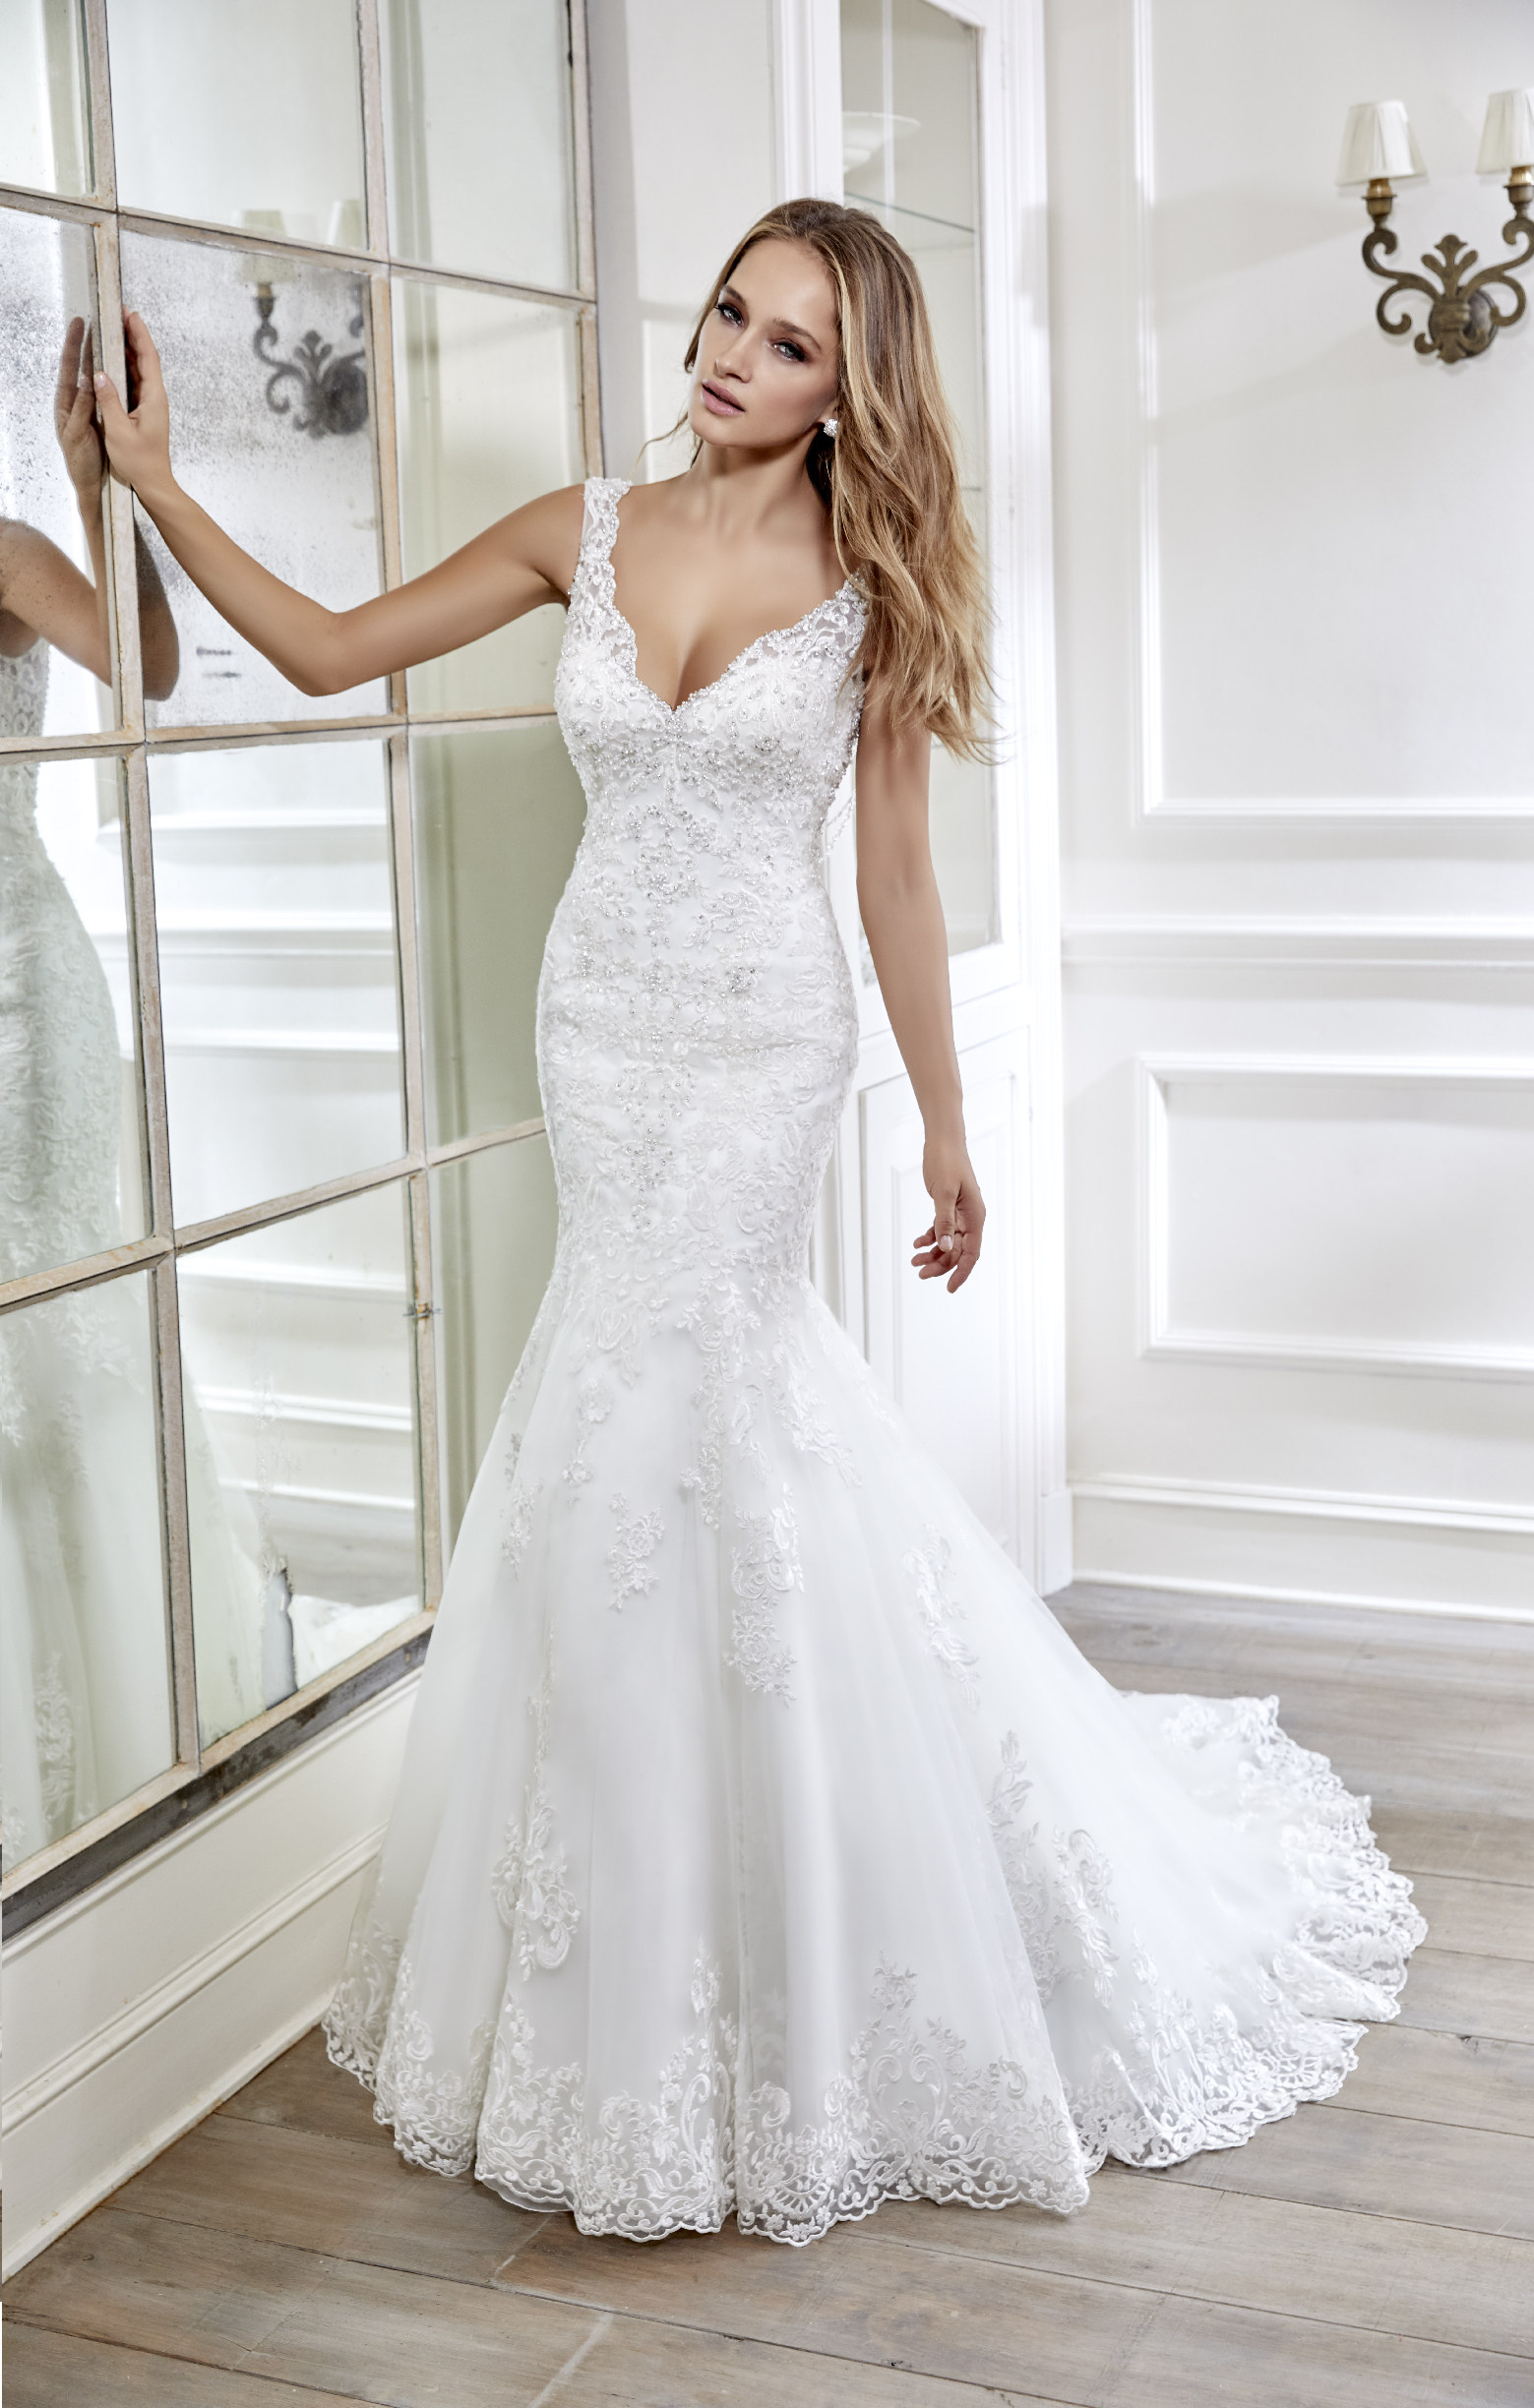 Model wears Ronald Joyce wedding dress style 69009 – a romantic lace fishtail dress with a v-neck that’s perfect for brides who need a wedding dress quickly.